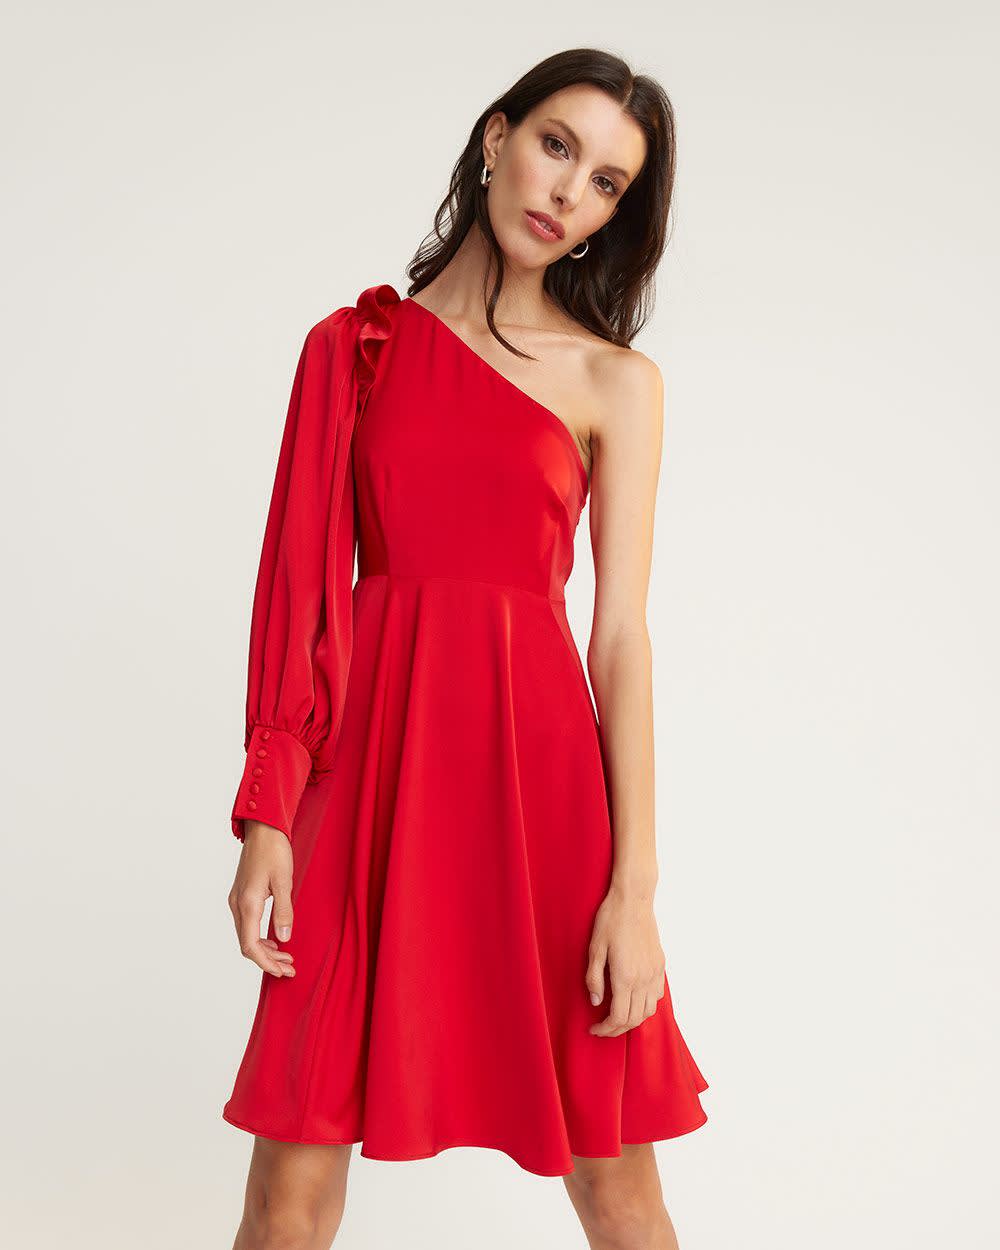 Puffy Long Sleeve One-Shoulder Satin Cocktail Dress | RW&CO.